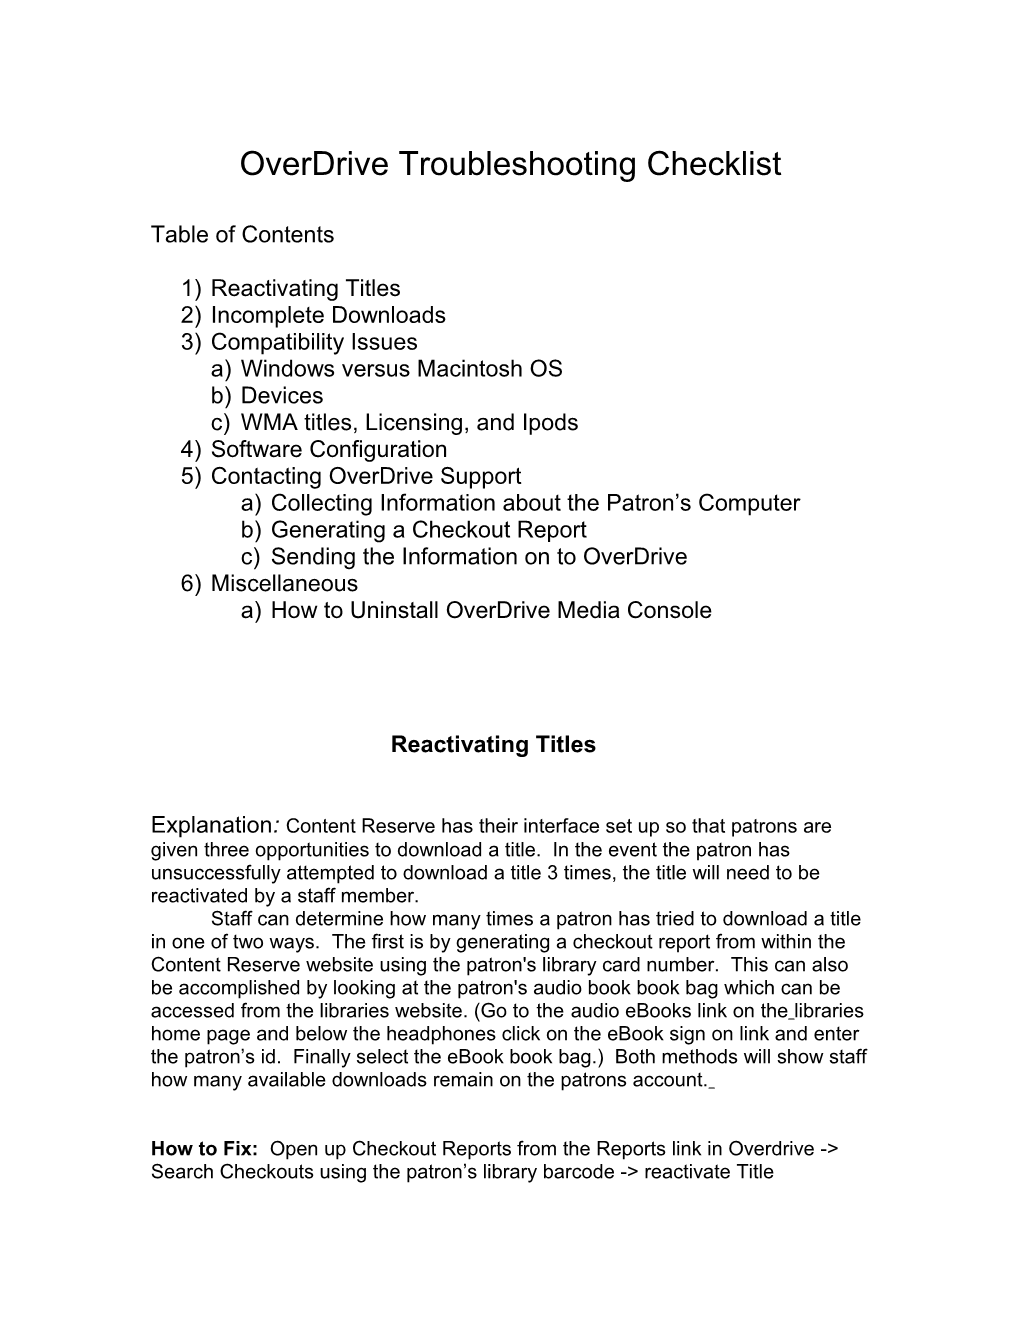 Content Reserve Troubleshooting Checklist